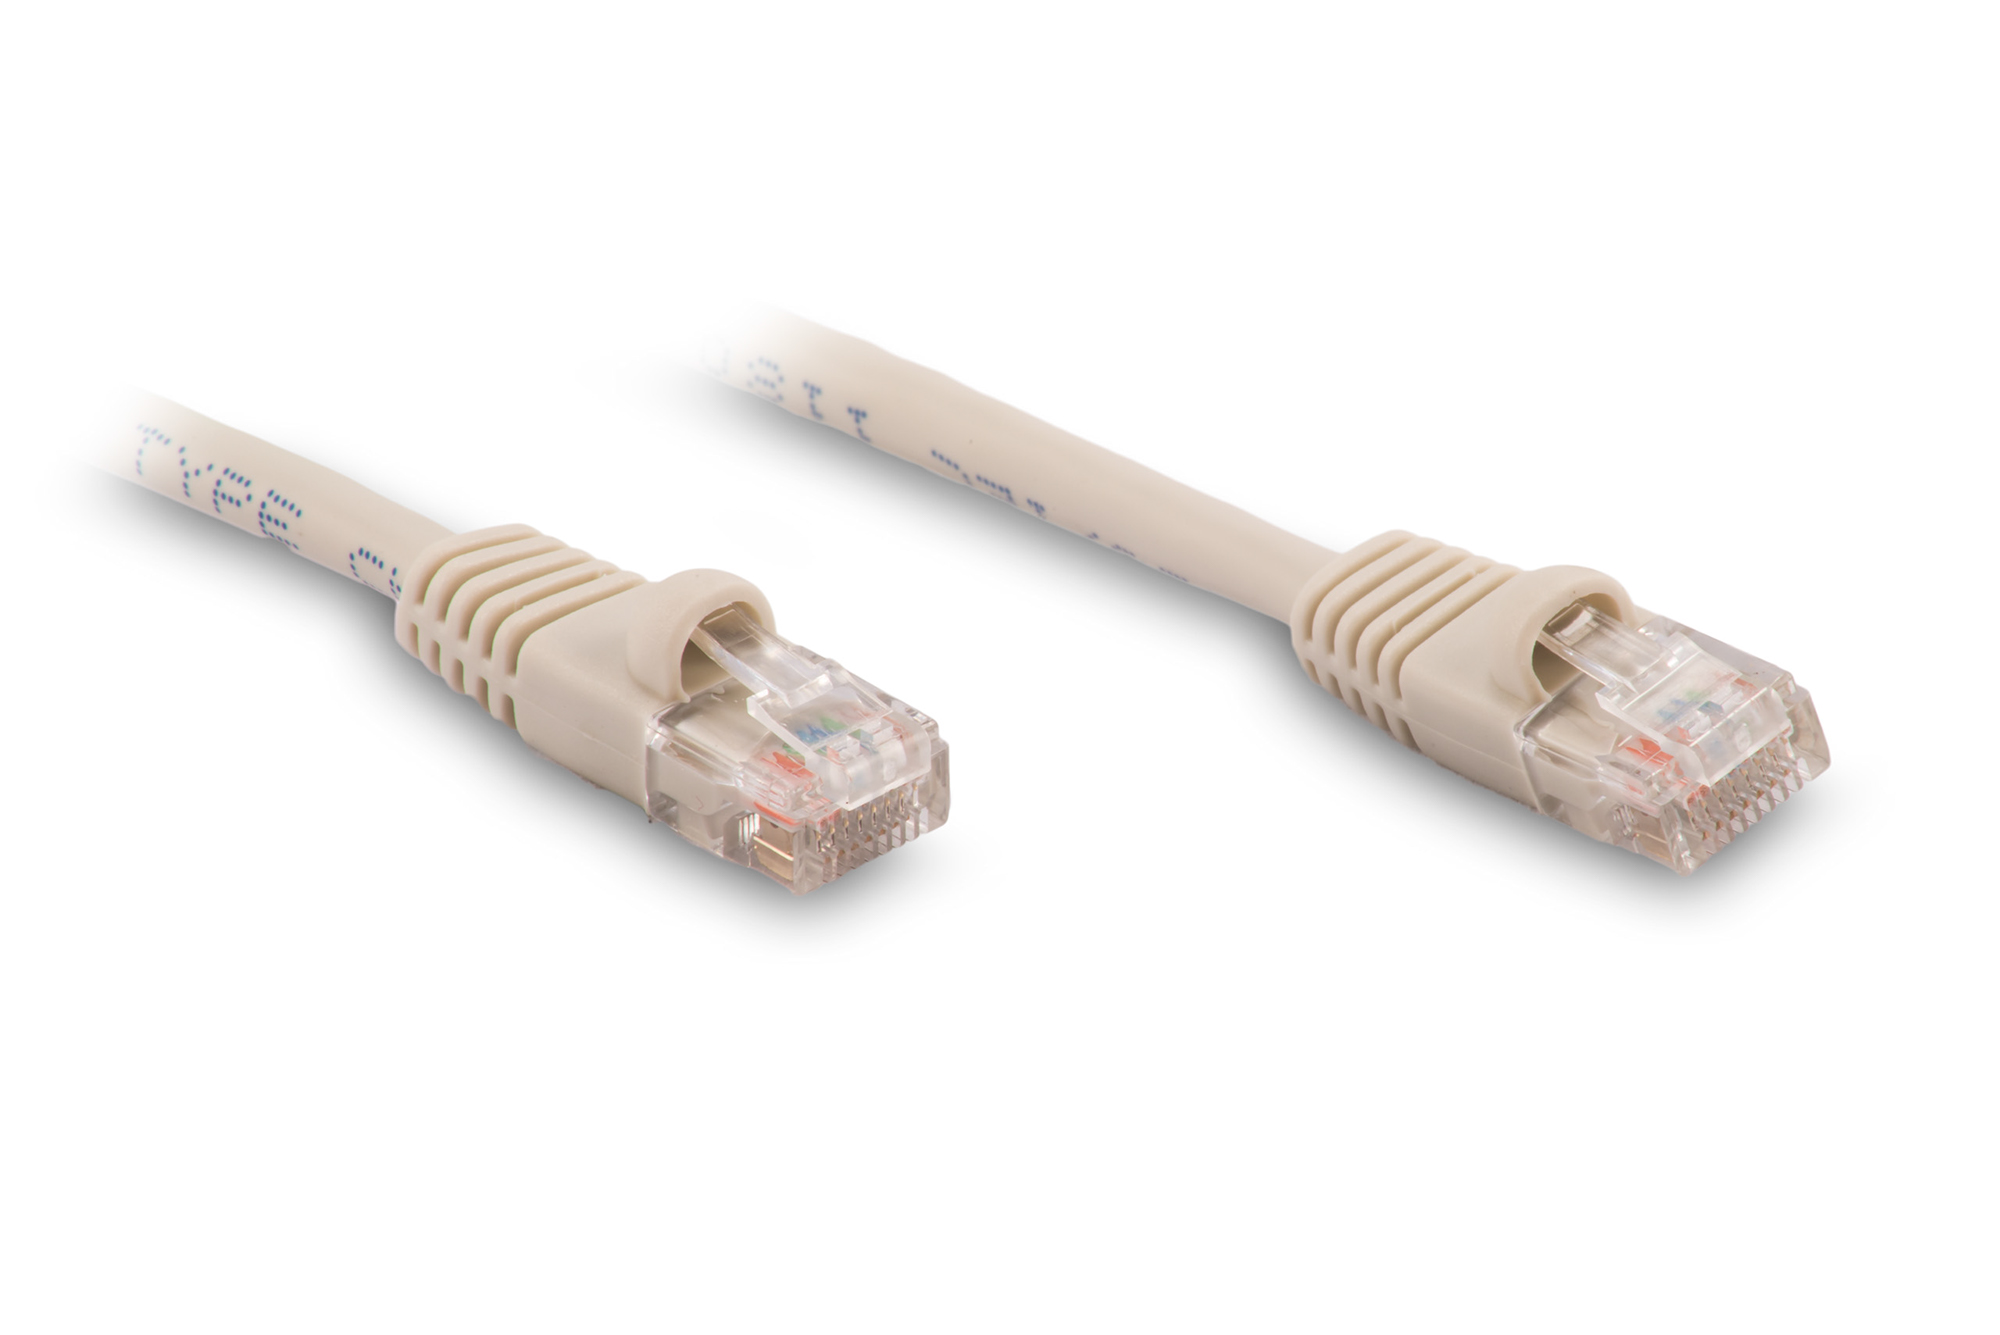 10ft Cat5e Ethernet Patch Cable - Gray Color - Snagless Boot